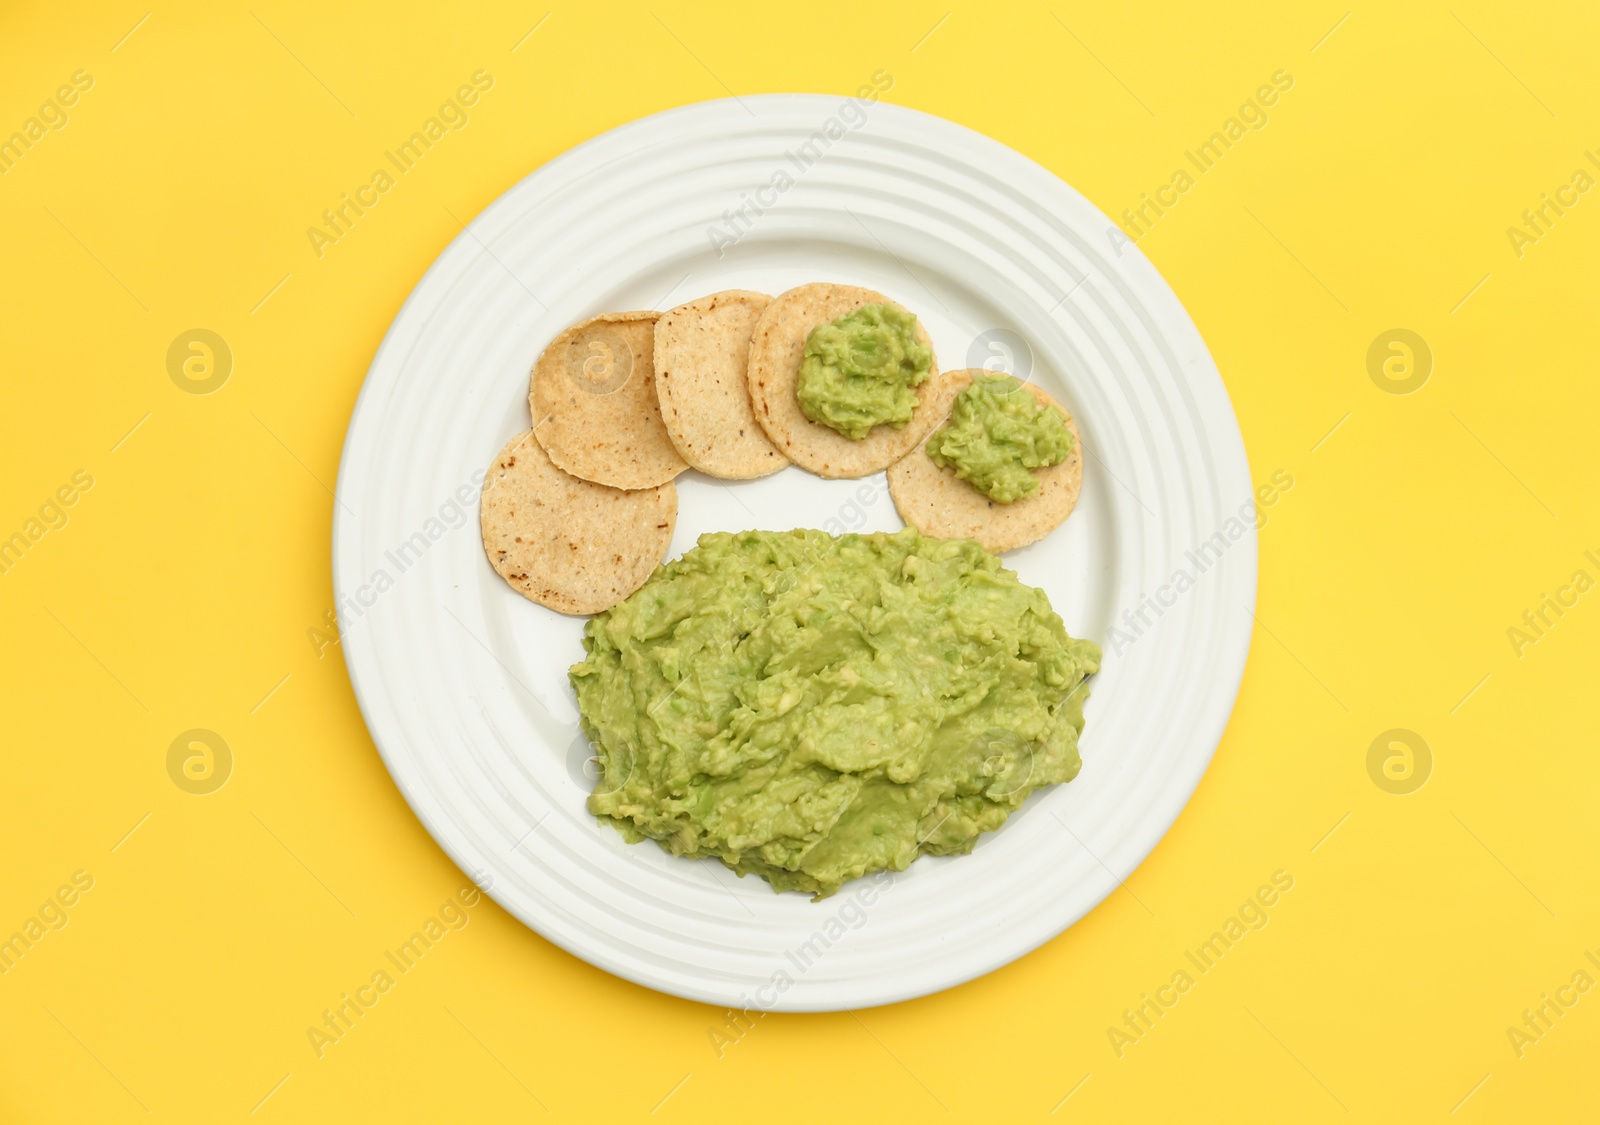 Photo of Delicious guacamole made of avocados and chips on yellow background, top view